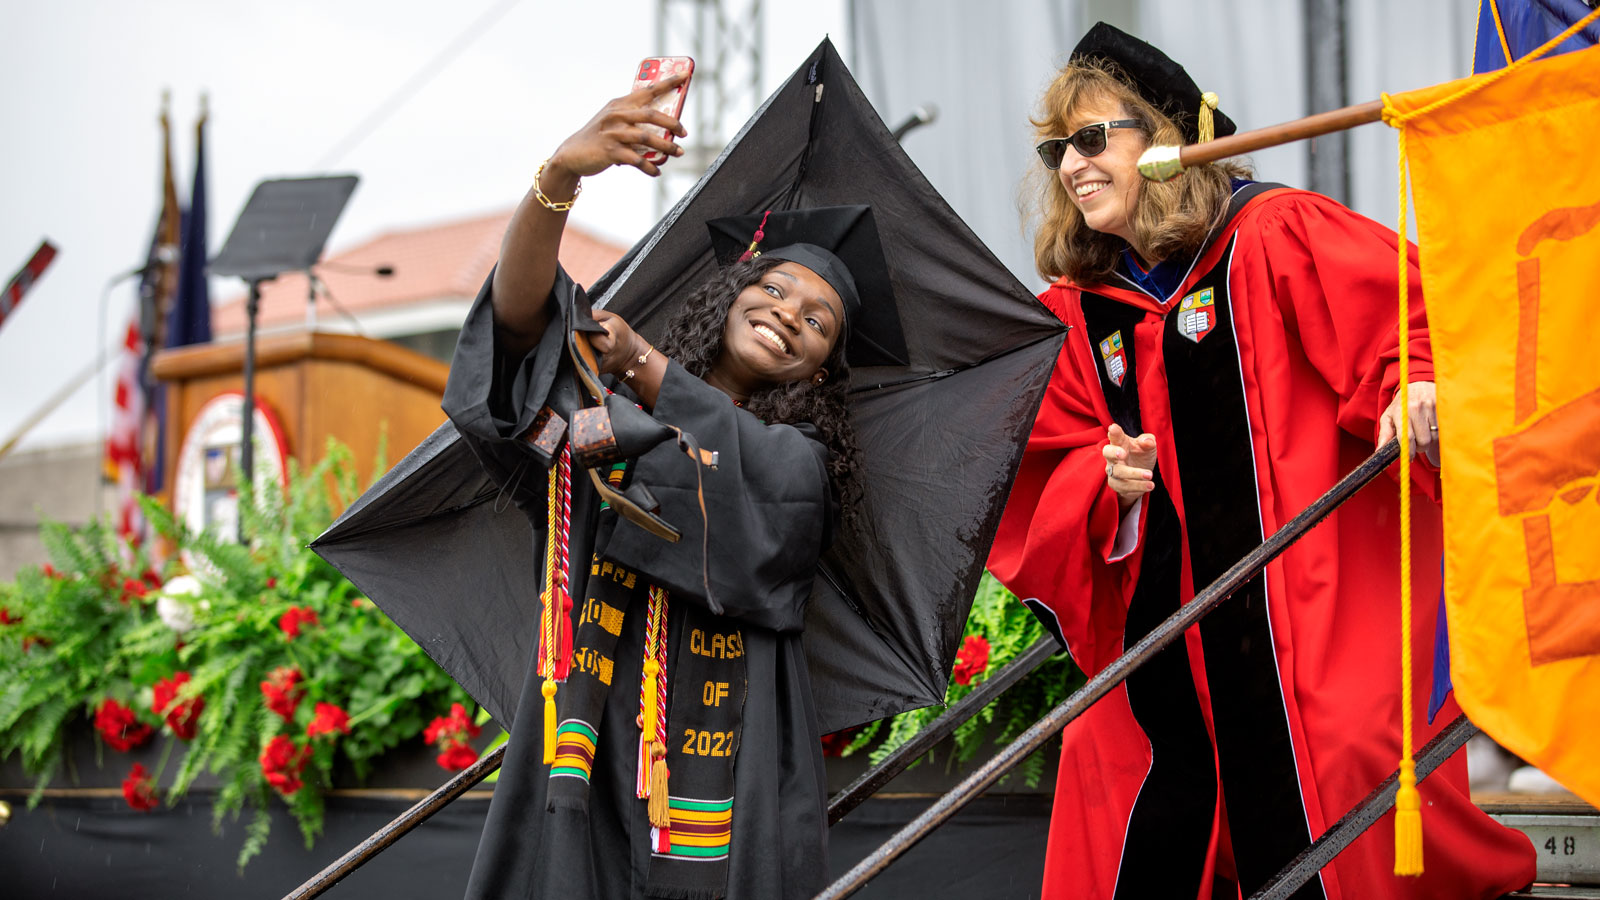 President Martha Pollack poses for a selfie with a graduating senior during Commencement 2022